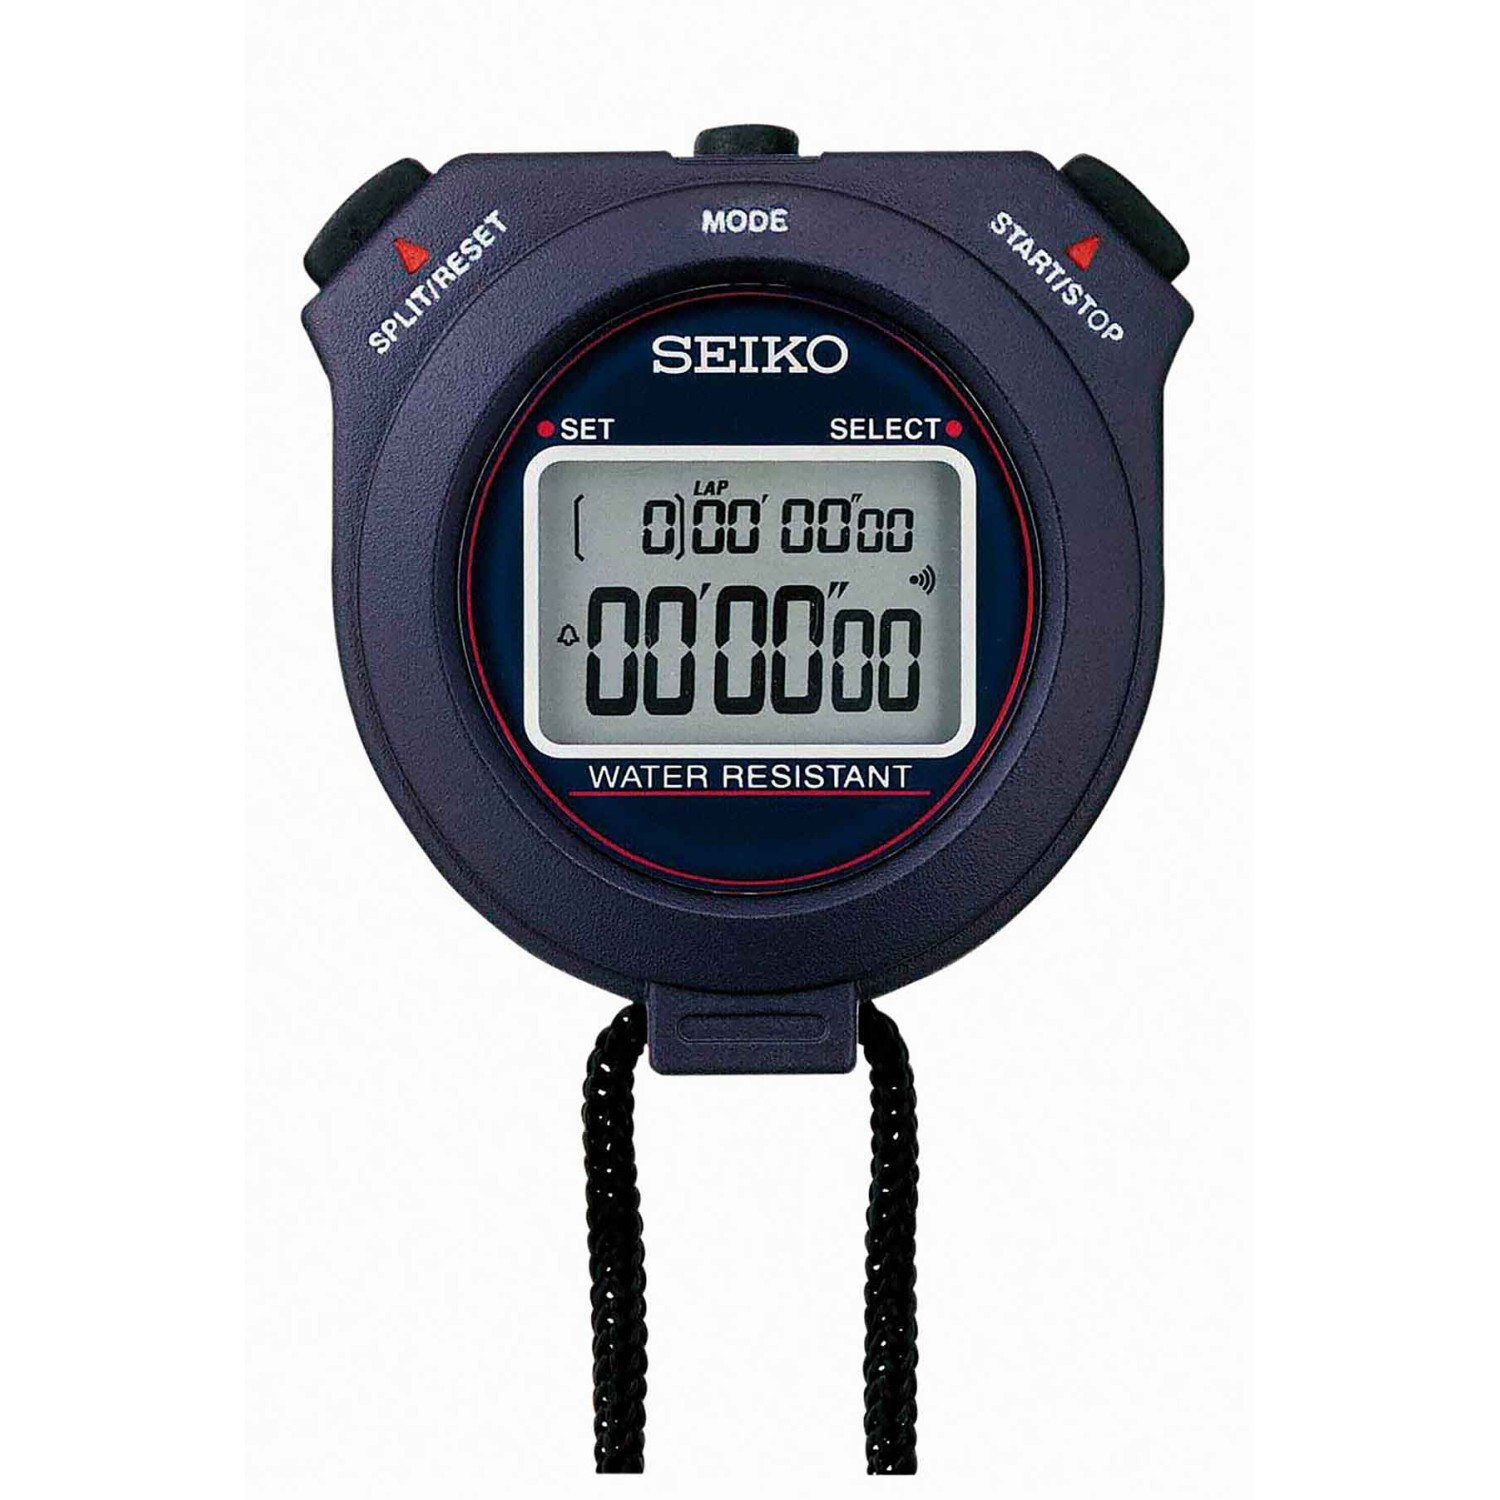 S23589J Seiko Multi Function Stopwatch. Oxipay is simply the easier way to pay - use Oxipay and well spread your payment up to a maximum of $1500 over 4 easy instalments. No interest. Ever! 3 Months No Payments and Interest for Q Card holders 10 Split/Lap